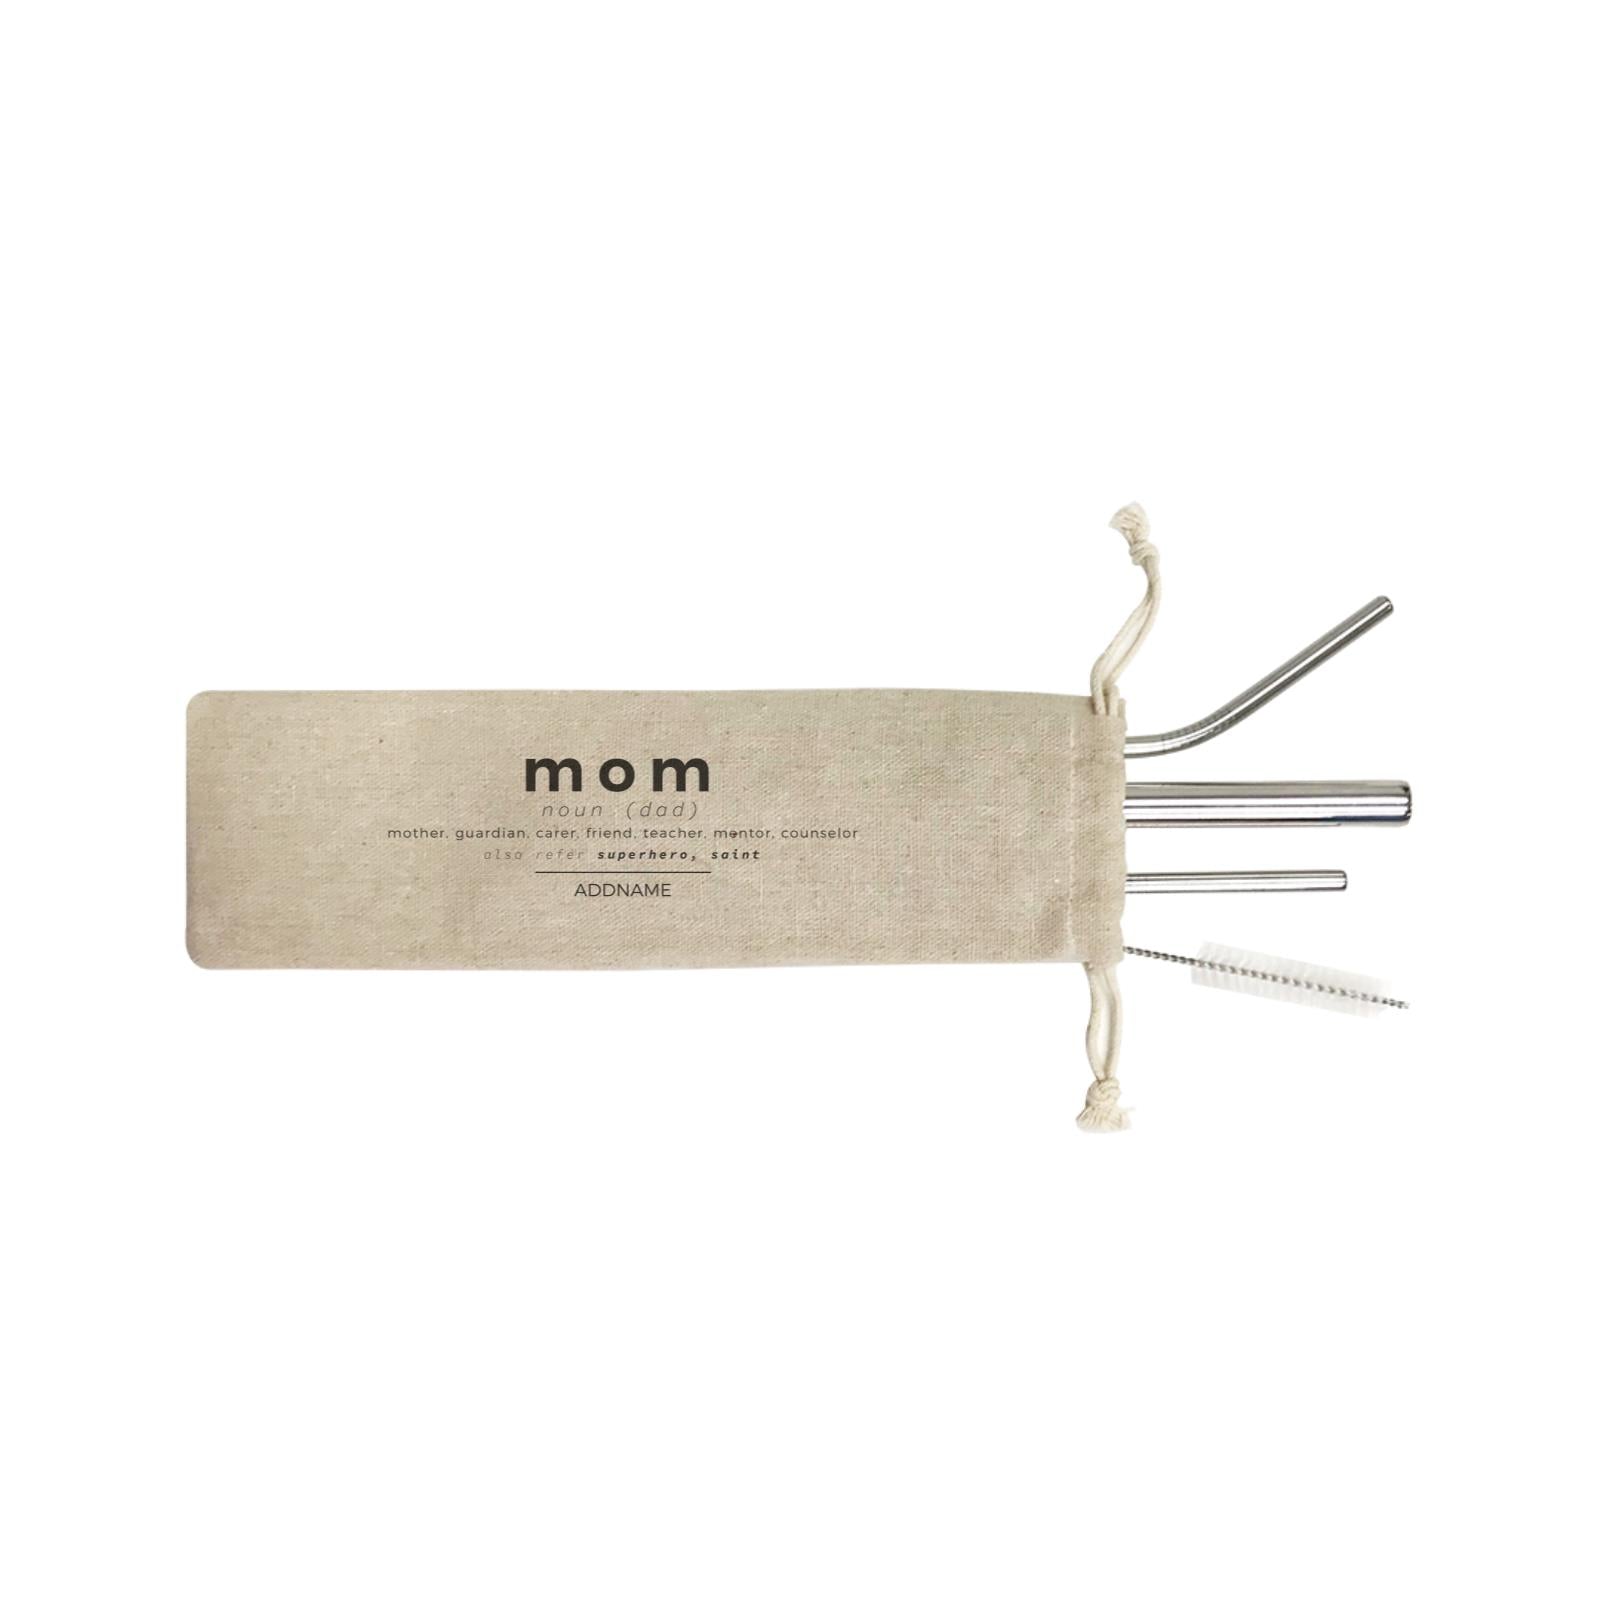 Mom Definition Mom Noun Definition Addname SB 4-In-1 Stainless Steel Straw Set in Satchel